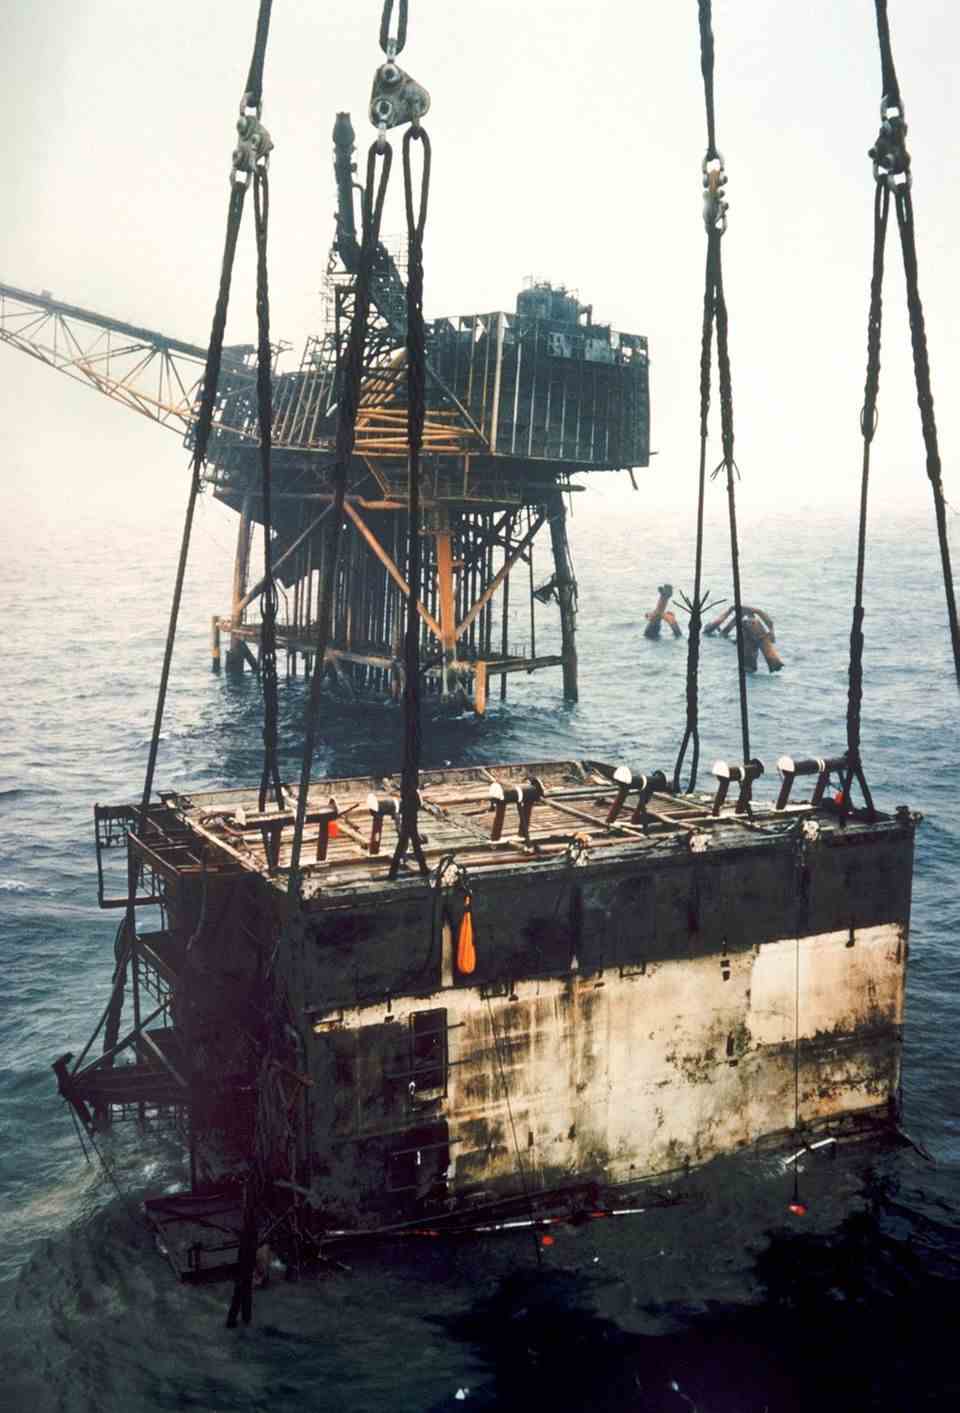 In October 1988 parts of the "Piper Alpha" recovered from the North Sea